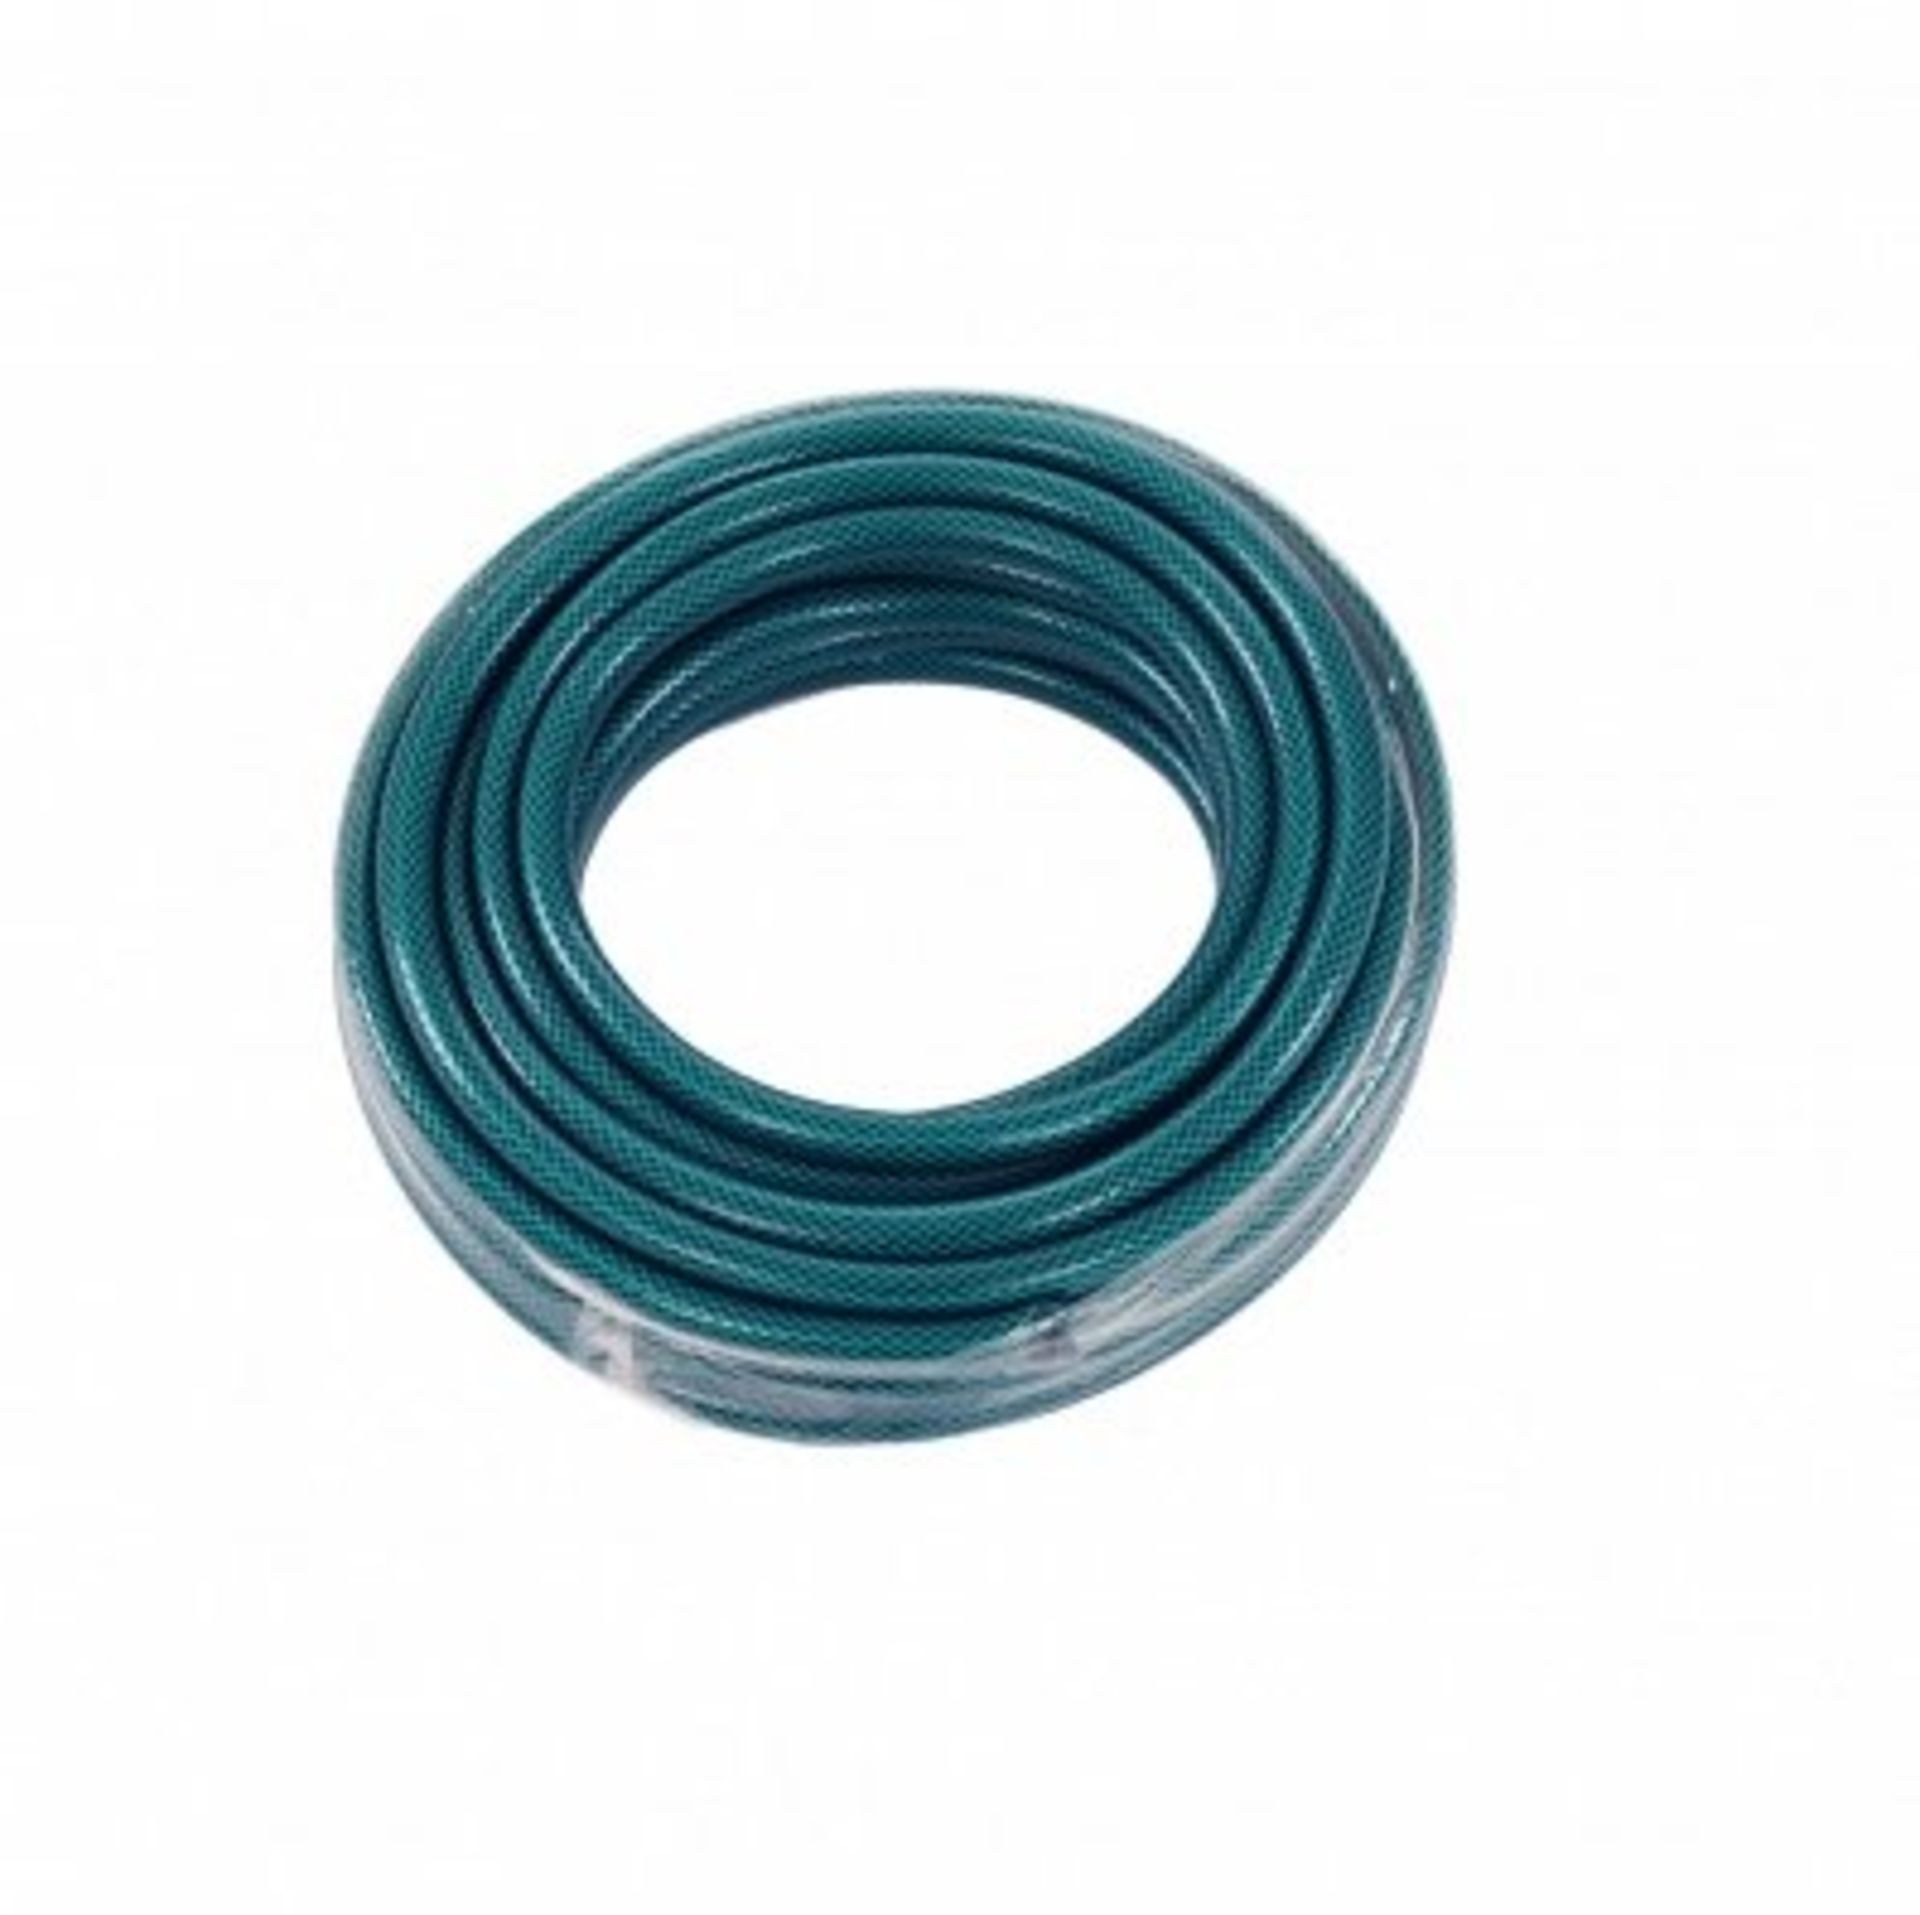 (RU286) 15m PVC Flexible Green Hose Outdoor Garden Hose Pipe With its incredible 15M in len... - Image 2 of 2